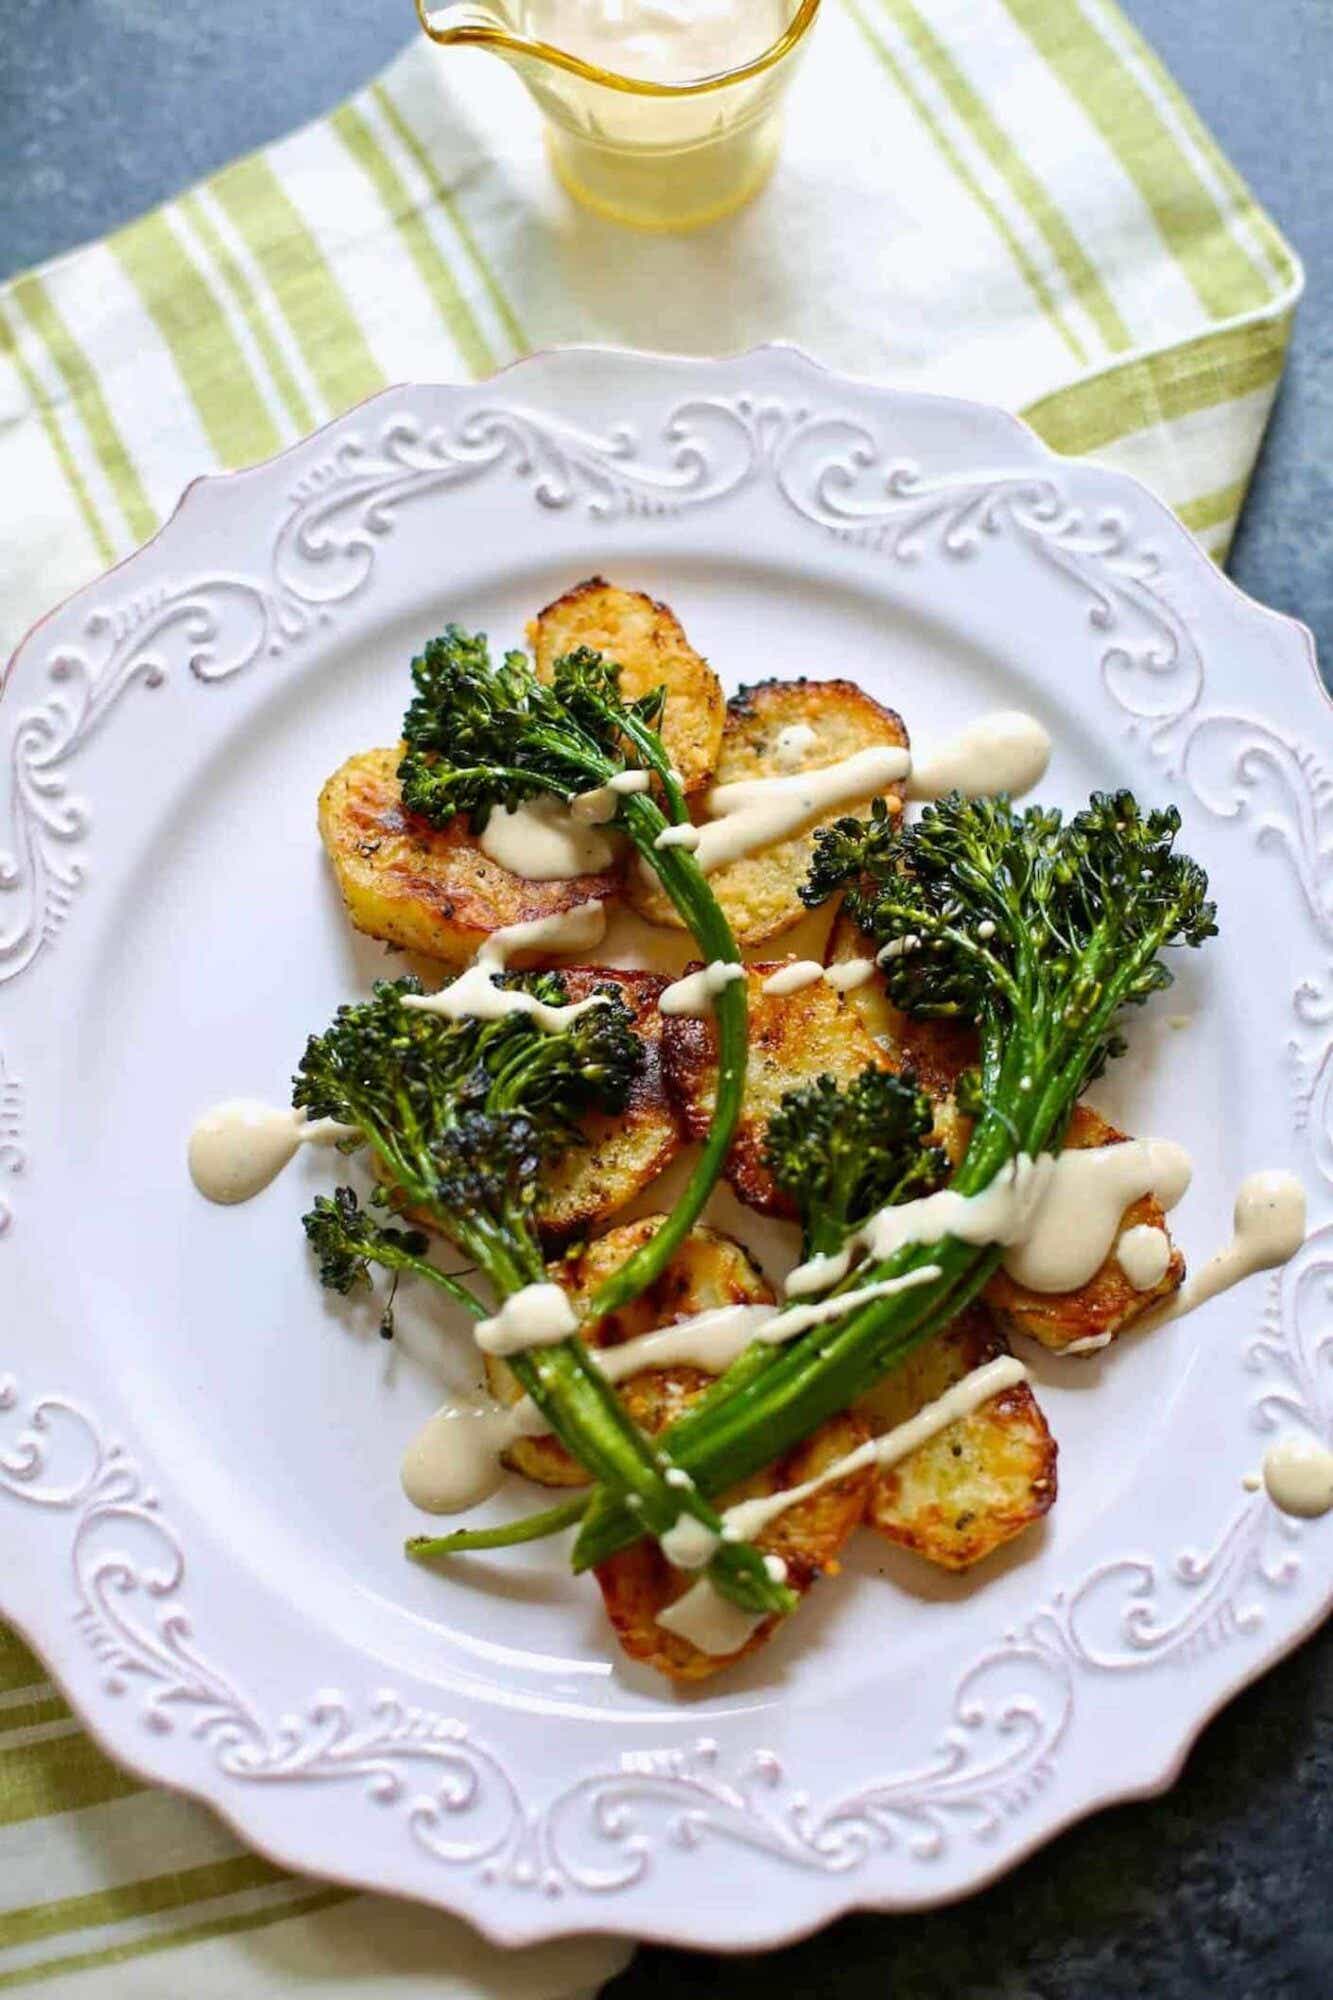 A white china plate is full of roasted potatoes and broccolini and sprinkled with a white sauce.